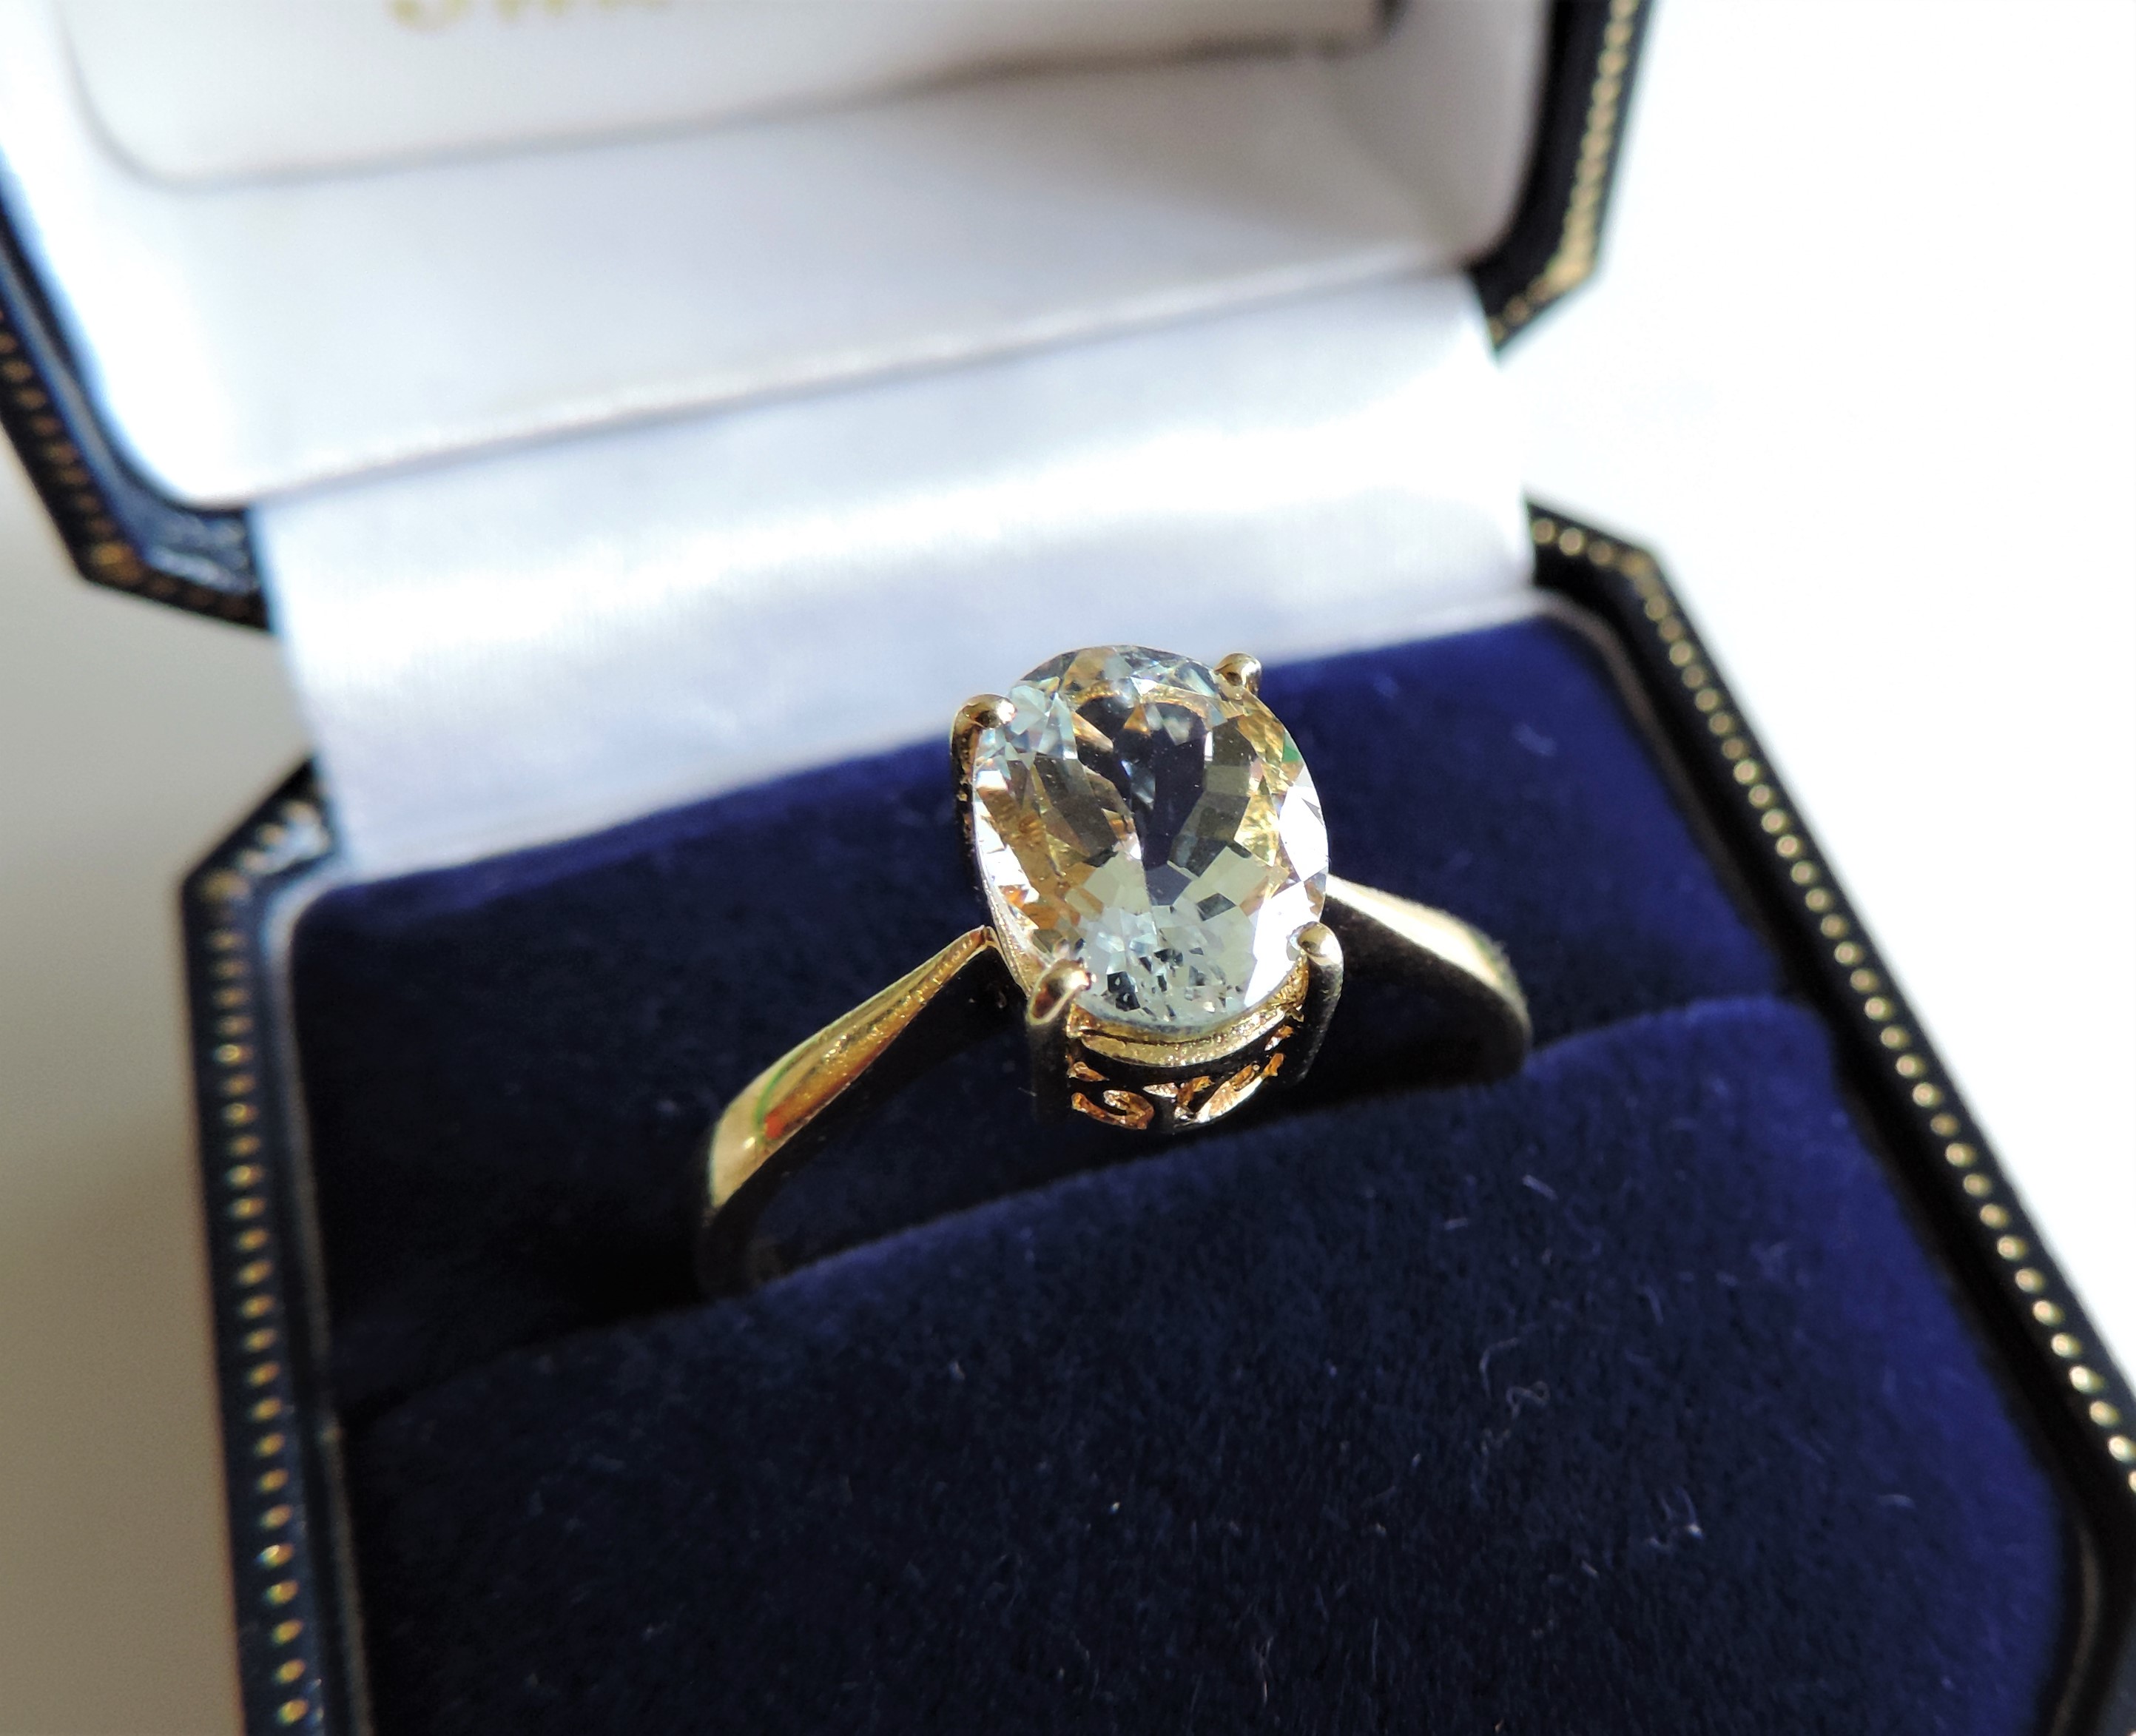 Gold on Sterling Silver 1.75 ct Aquamarine Ring - Image 2 of 5